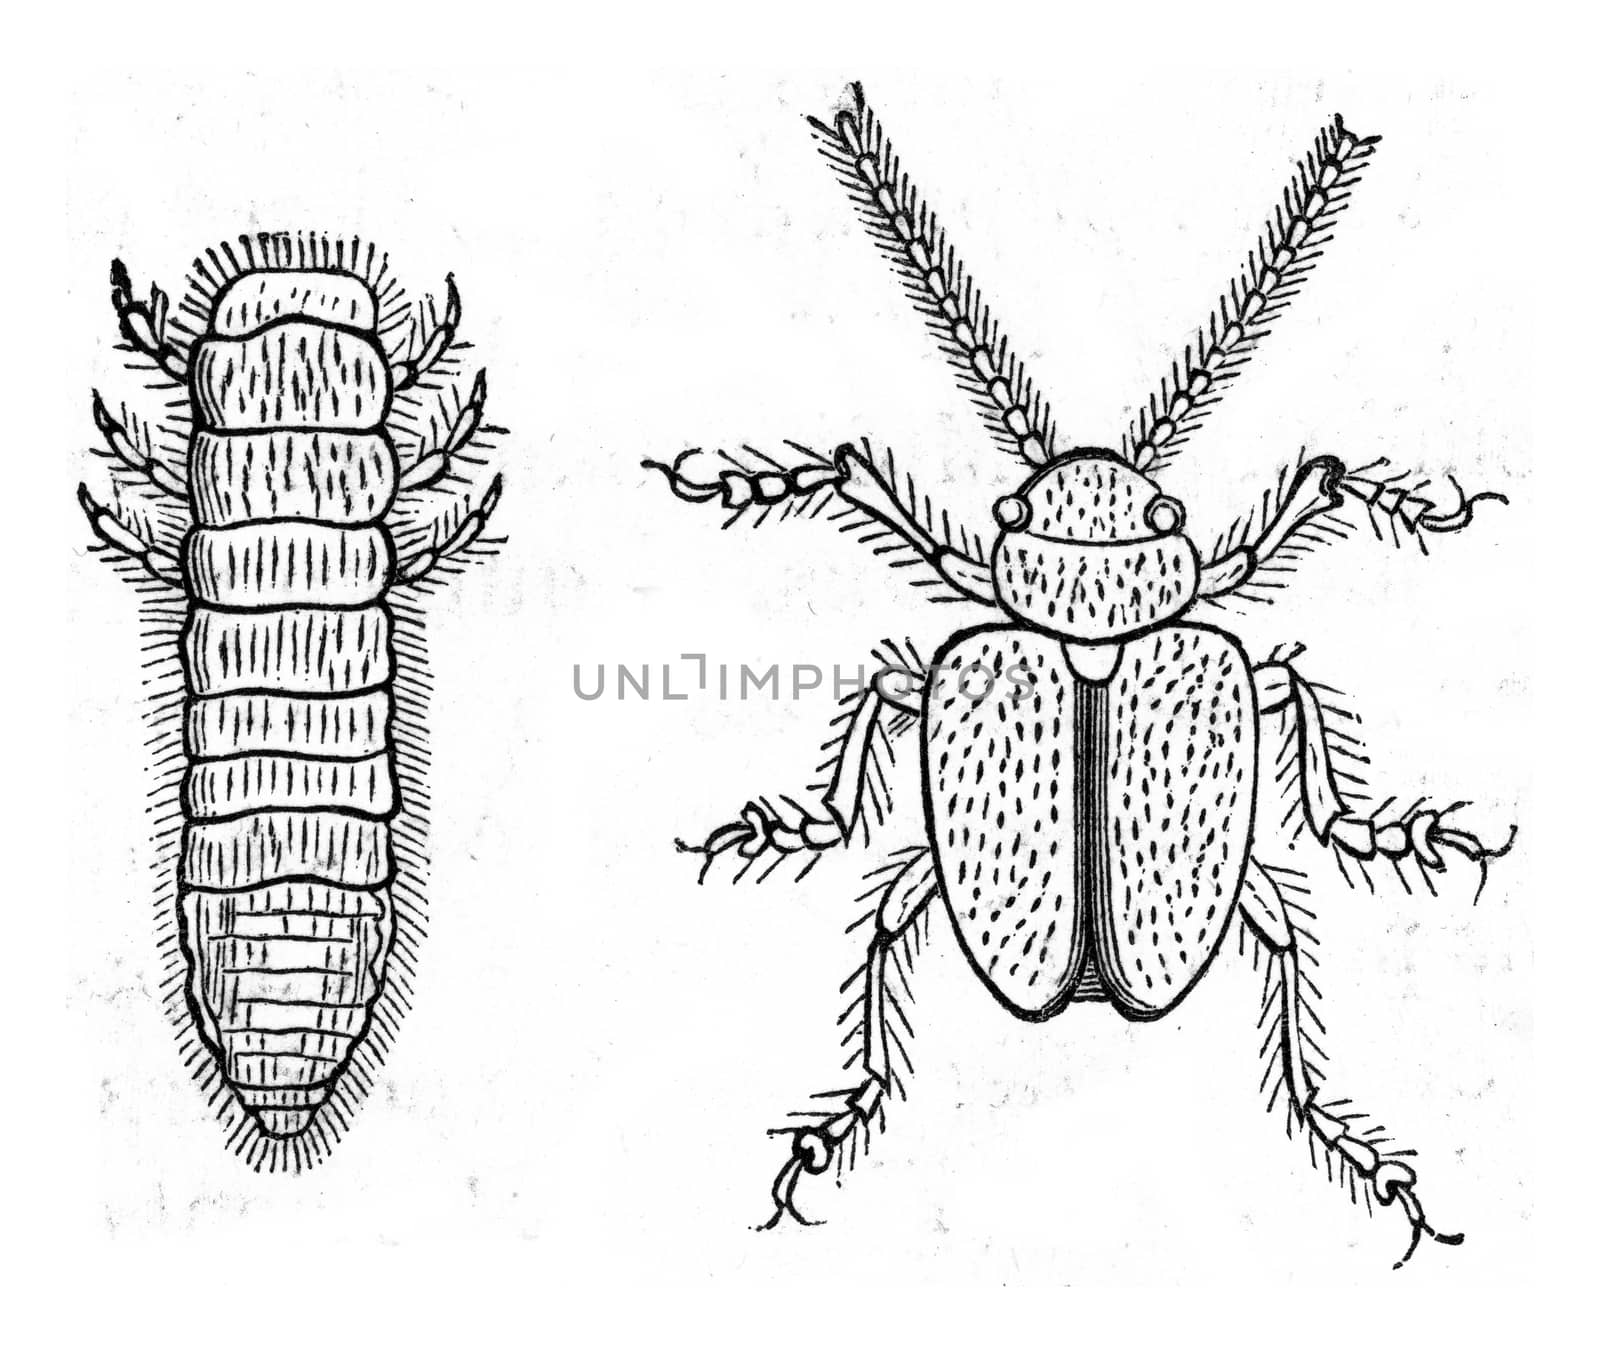 Colaspis of alfalfa, larva and adult state, vintage engraved illustration. From Zoology Elements from Paul Gervais.
